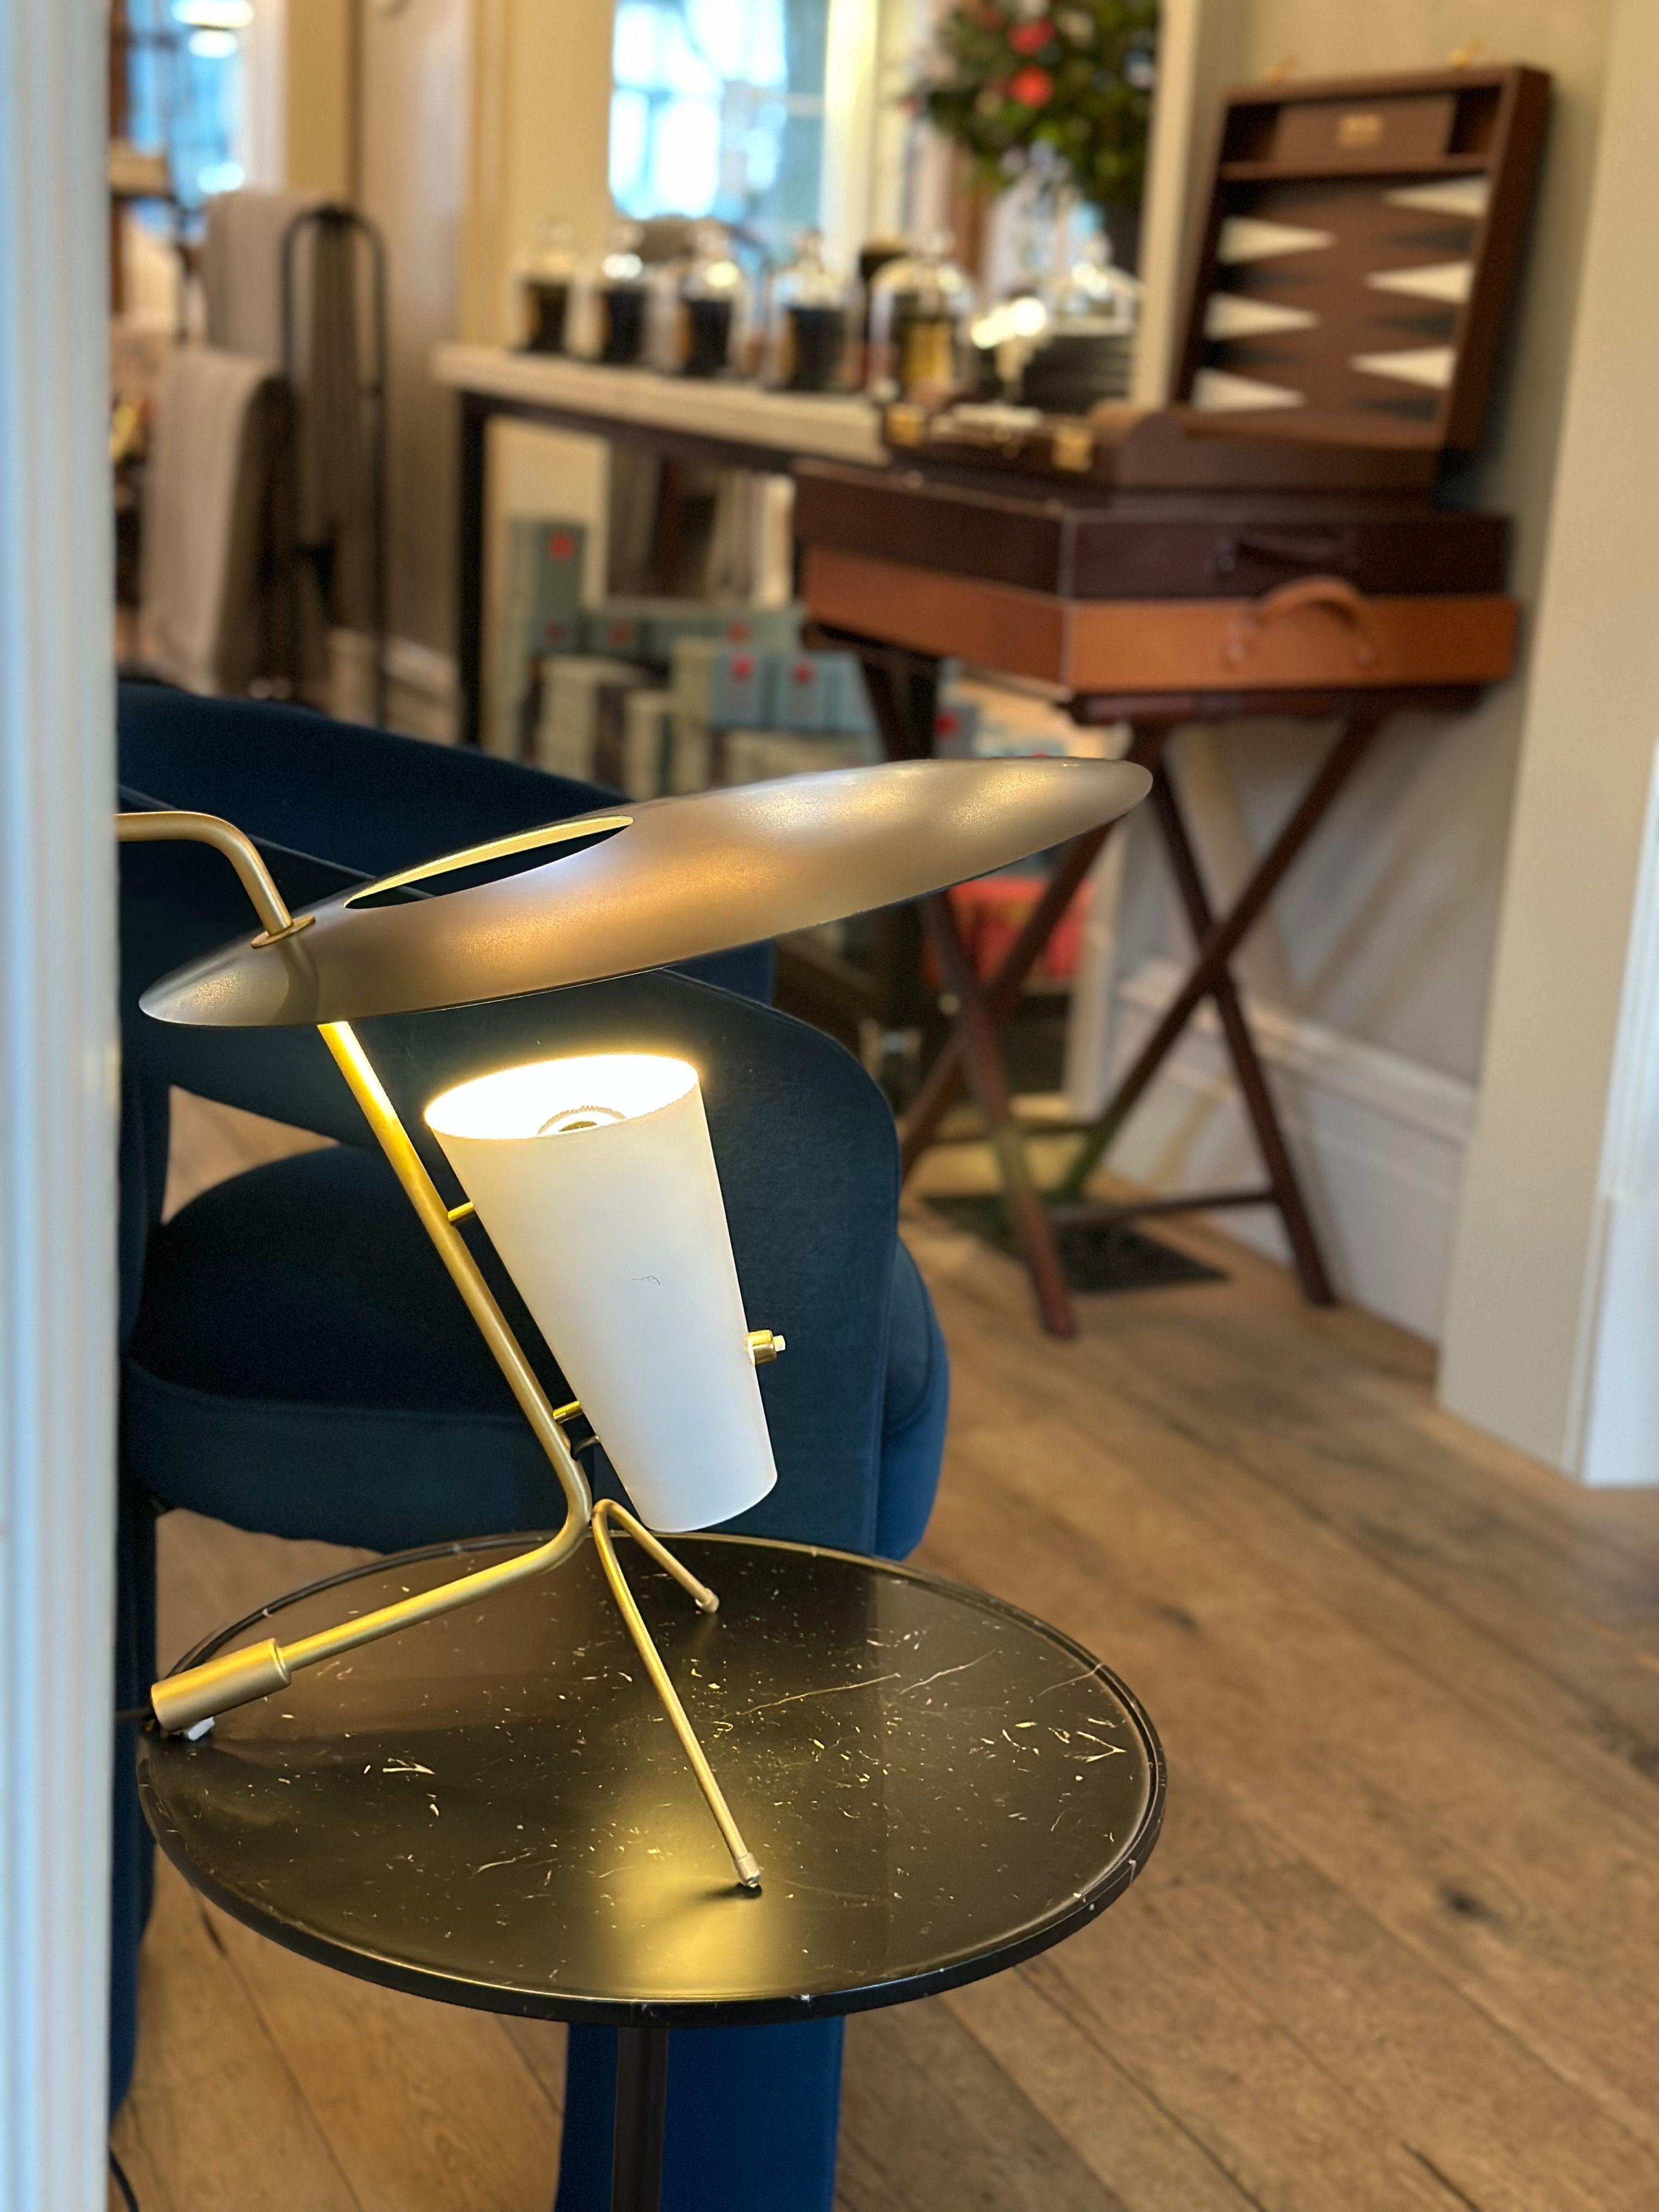 Colors, curves, and contours. The G24 table lamp is a fascinating display of the creative work of Pierre Guariche. Enclosed in a miniature sconce, this light is as striking visually as is it functional. Now available at MONC XIII.

Sammode is an